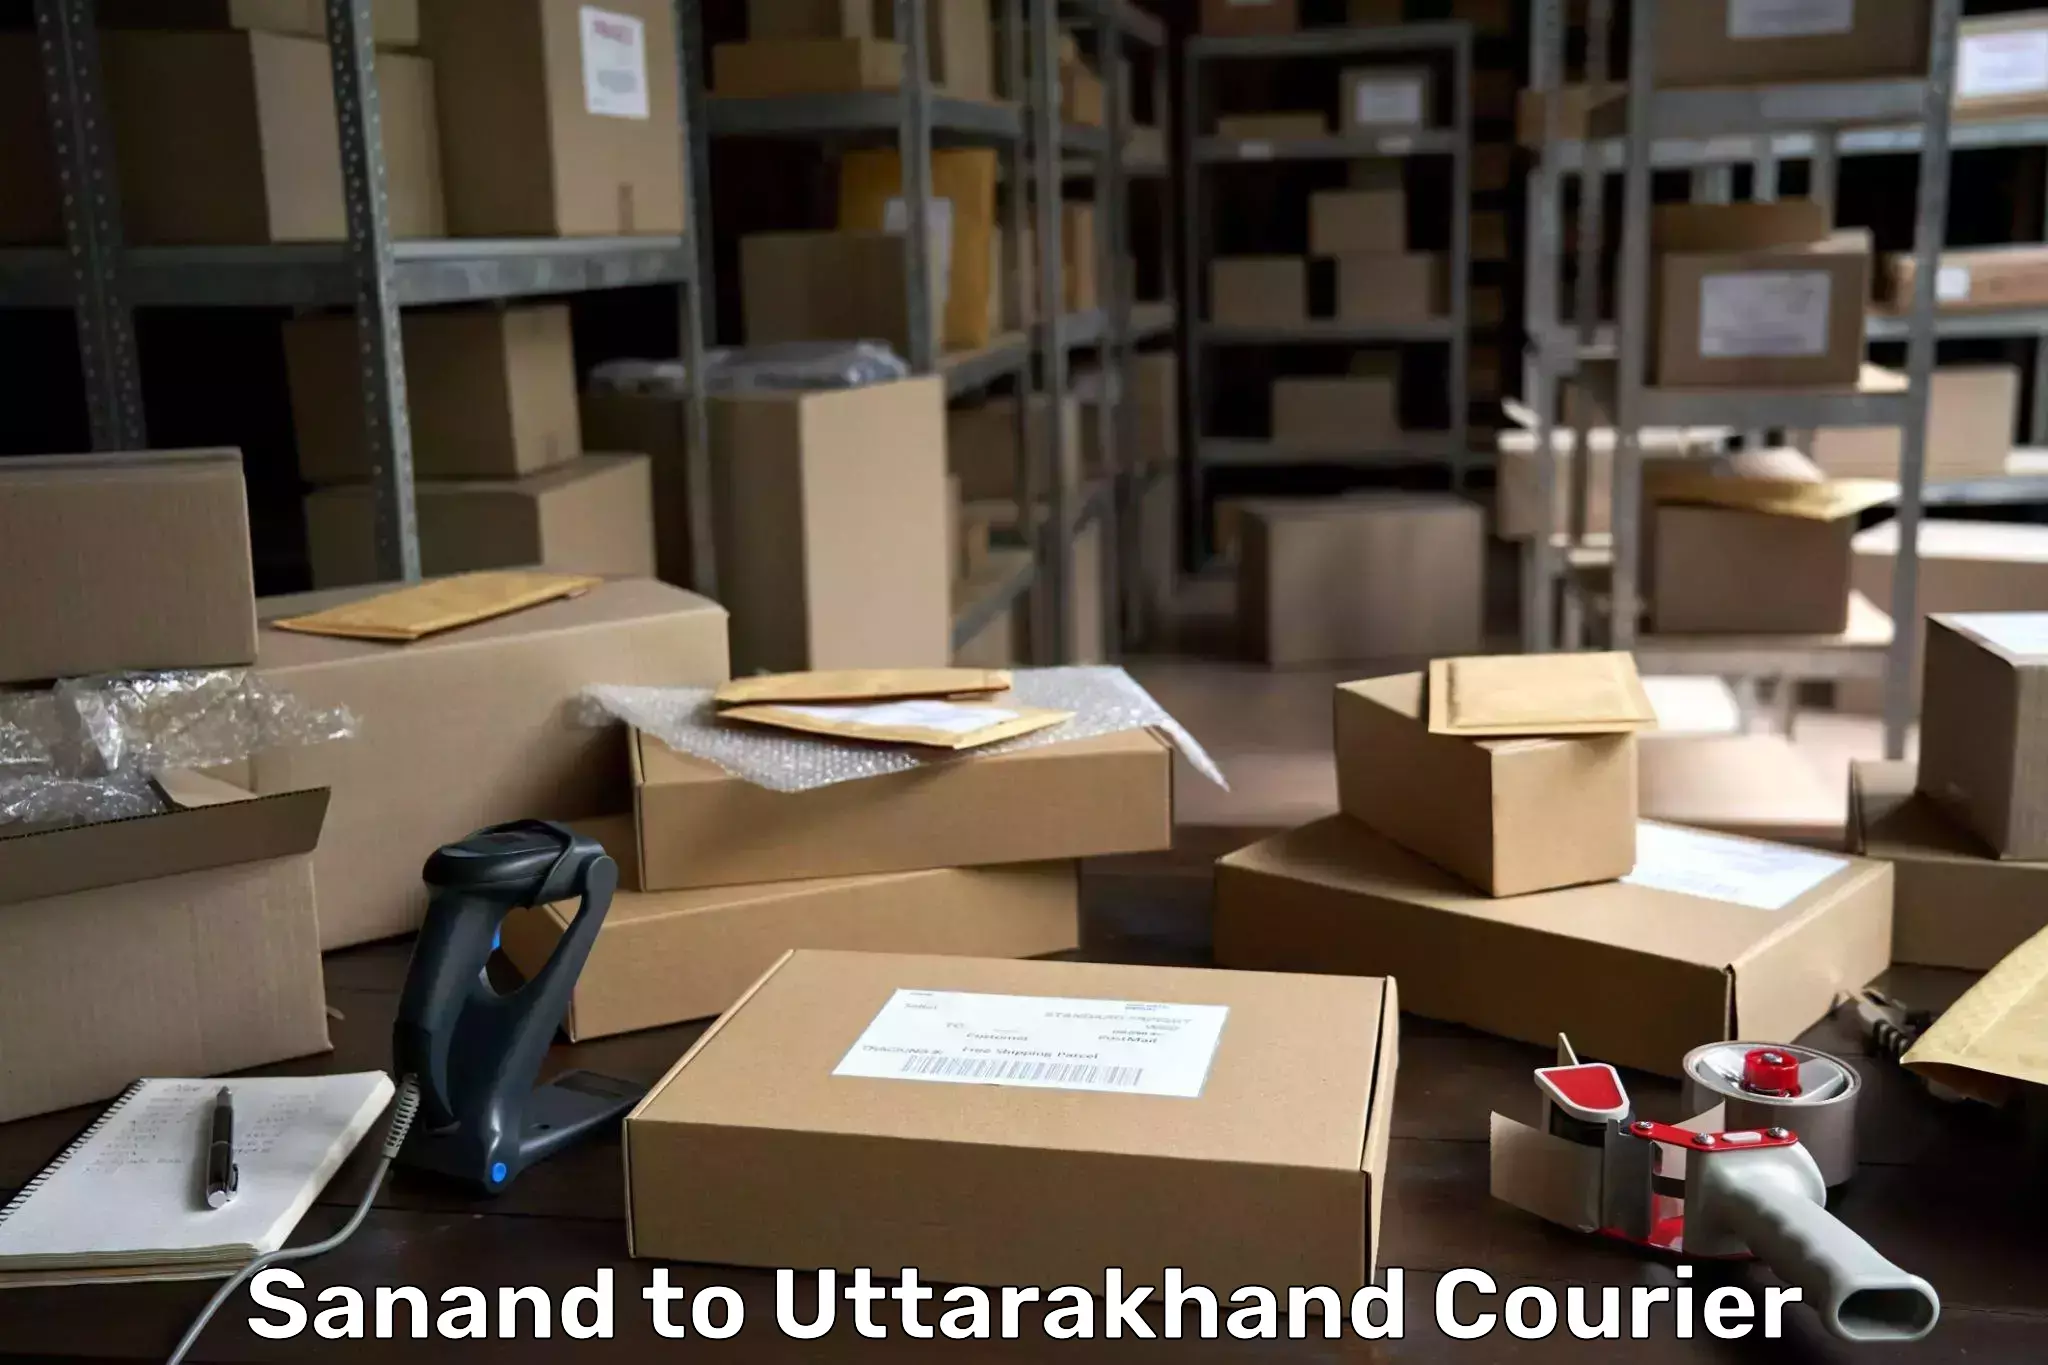 Full-service courier options Sanand to Dehradun